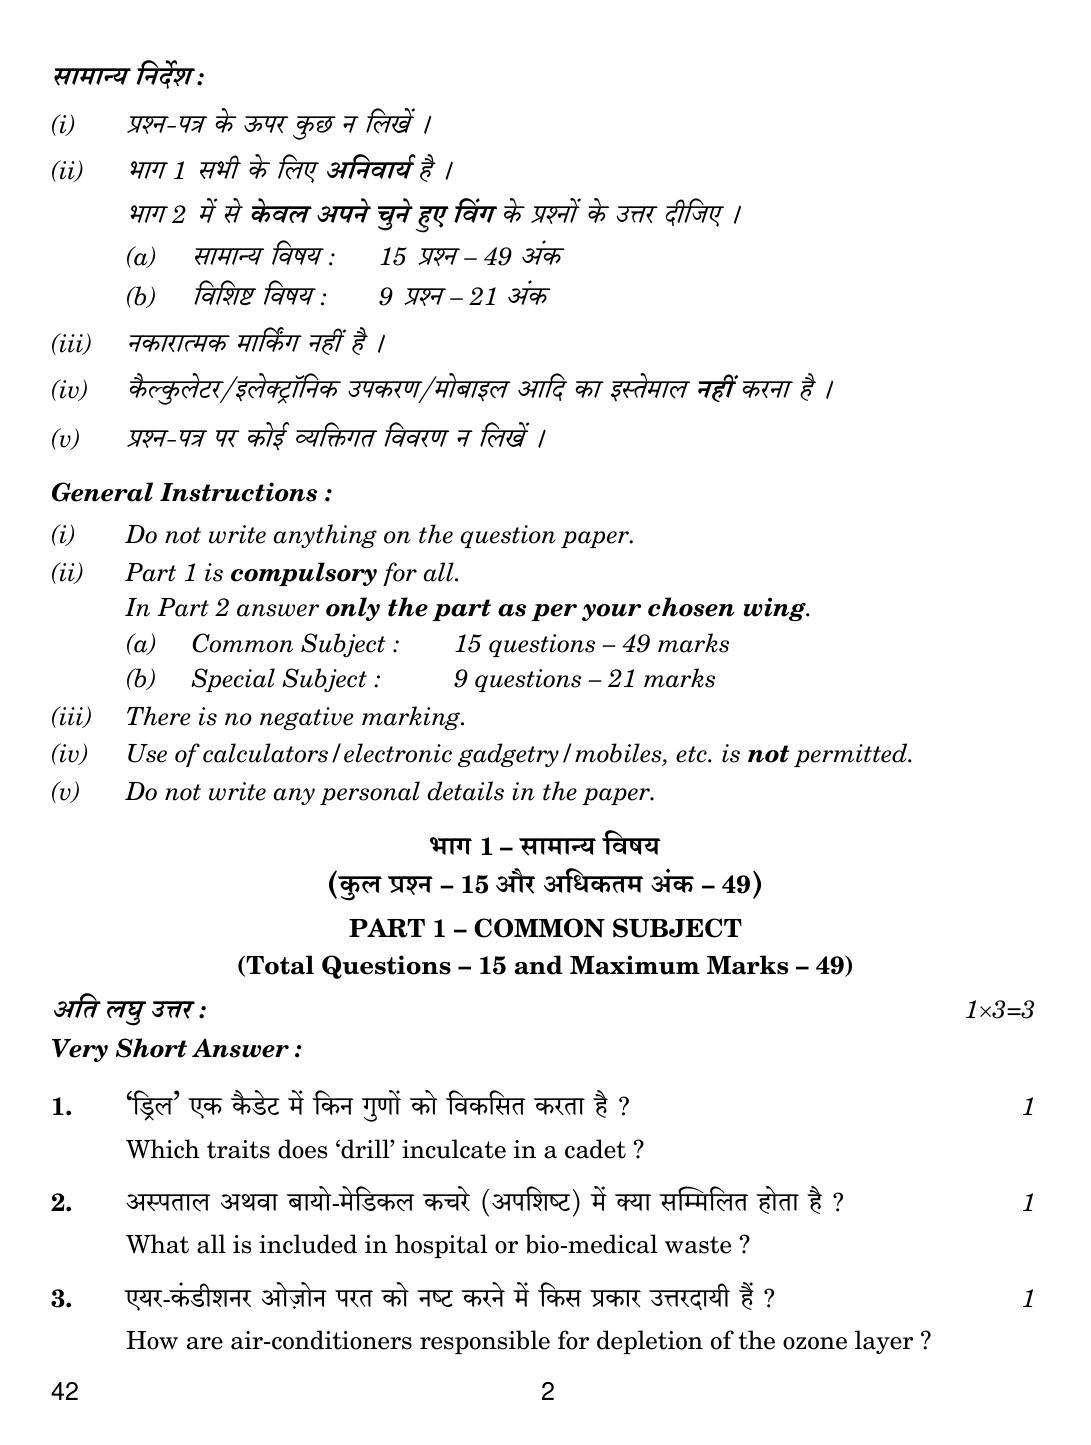 CBSE Class 12 42 National Cadet Corps (NCC) 2019 Question Paper - Page 2